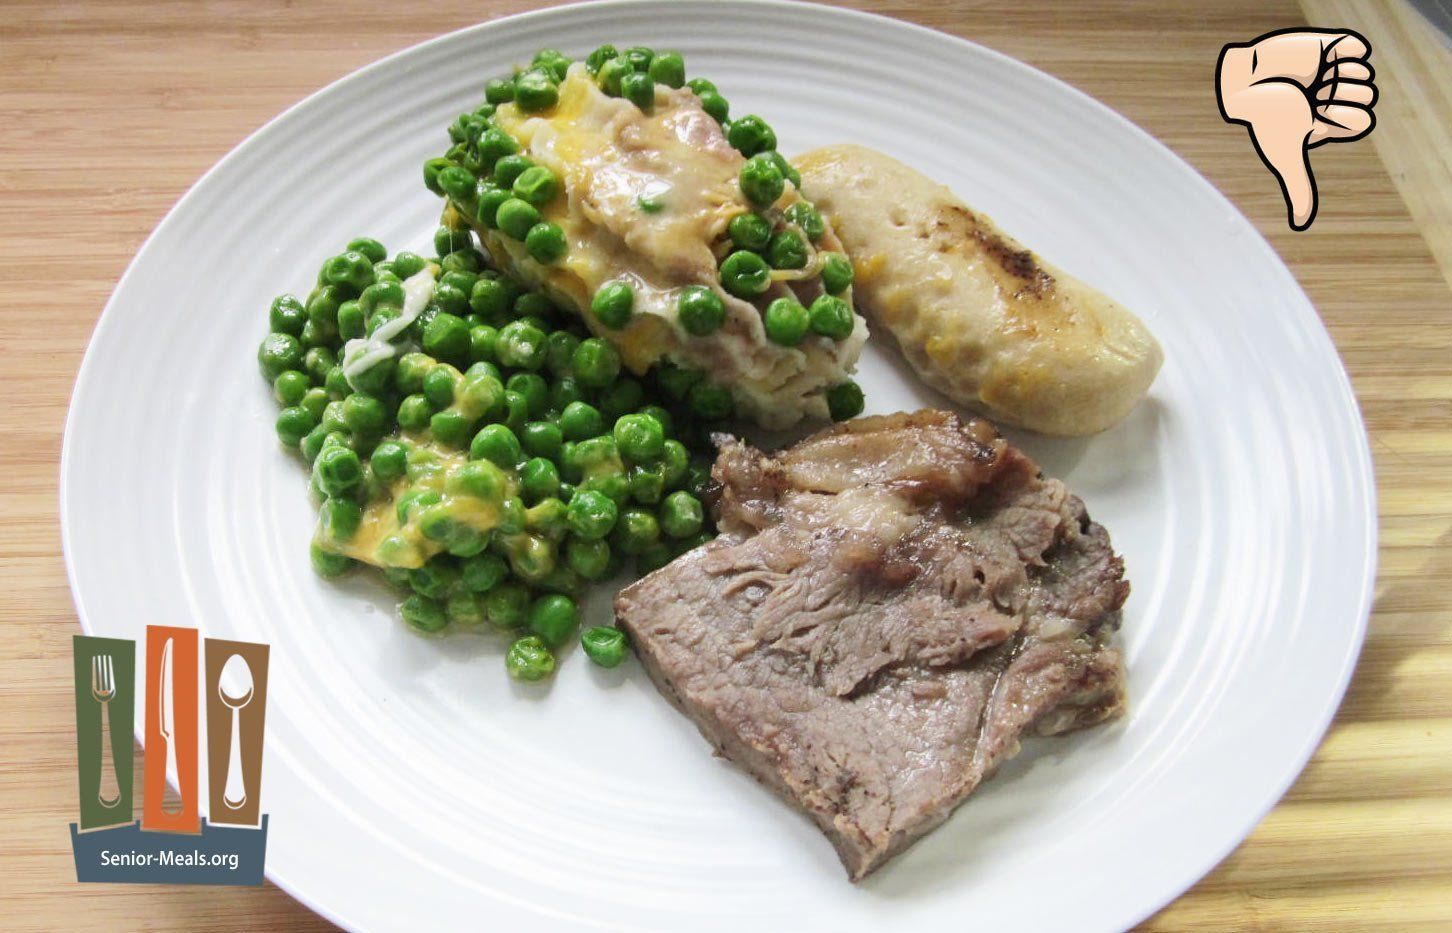 Beef Strip Loin Steak - The Small Portion of Beef was Tough, Dry, and Fatty. The Peas and Potatoes were all Mushed Together Because of Single Compartment Tray, and the Roll didn't Reheat Well.